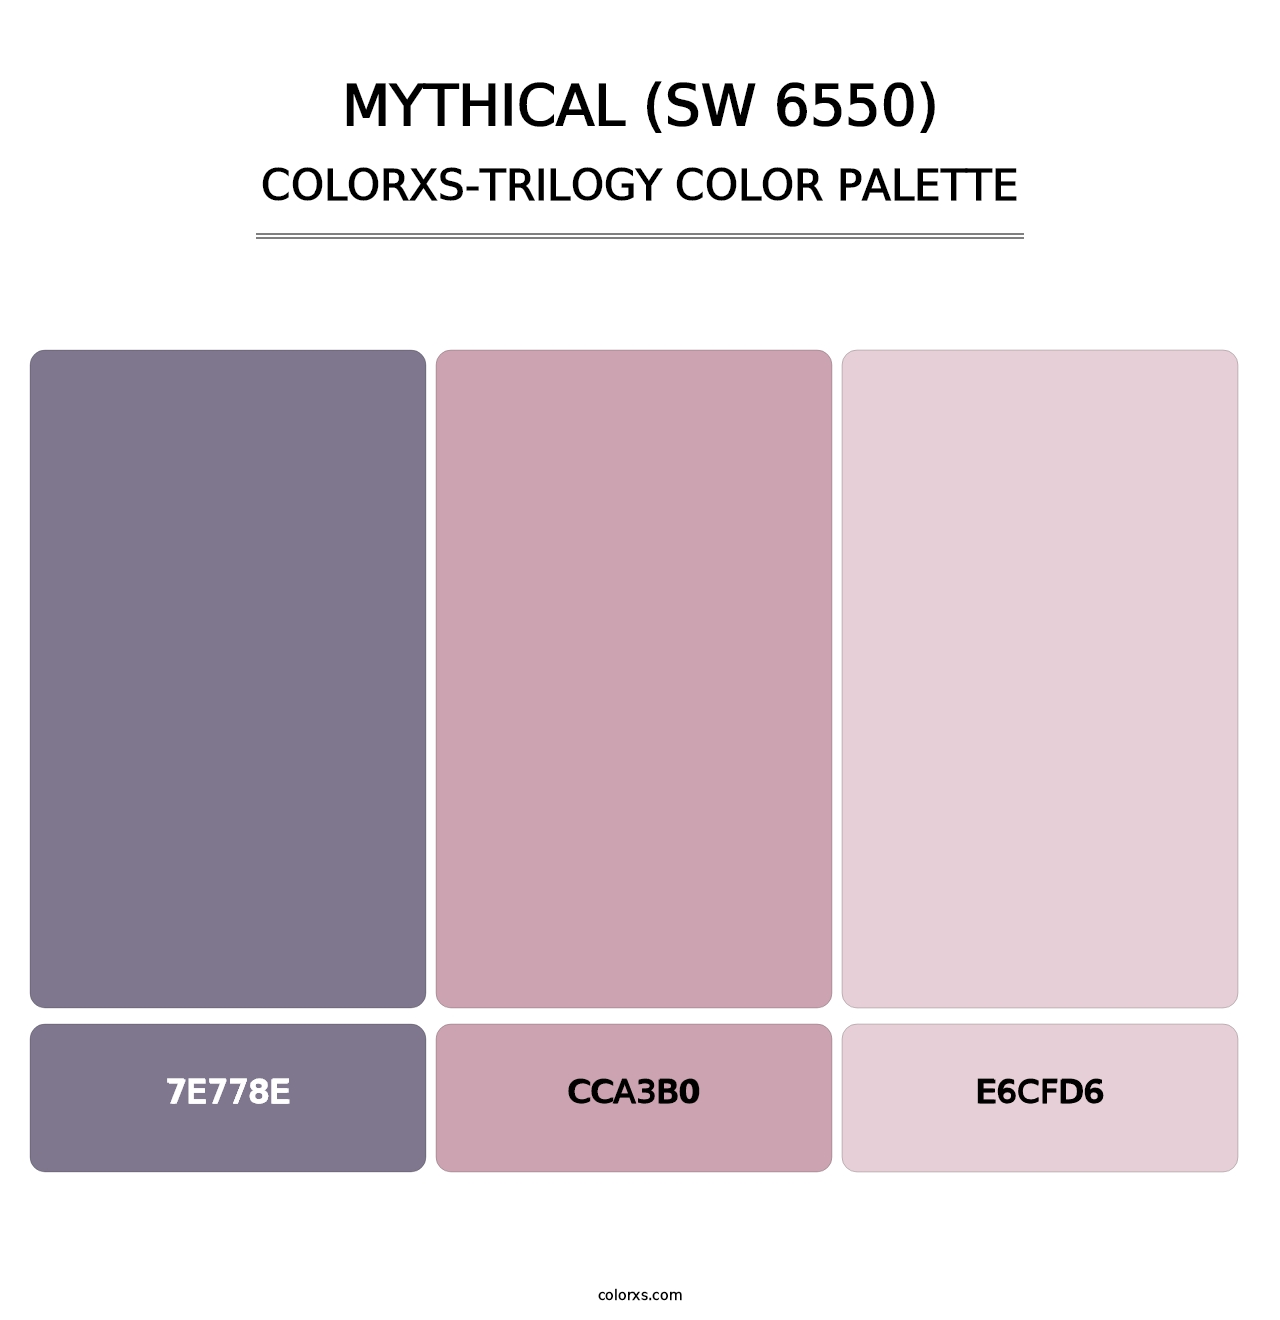 Mythical (SW 6550) - Colorxs Trilogy Palette